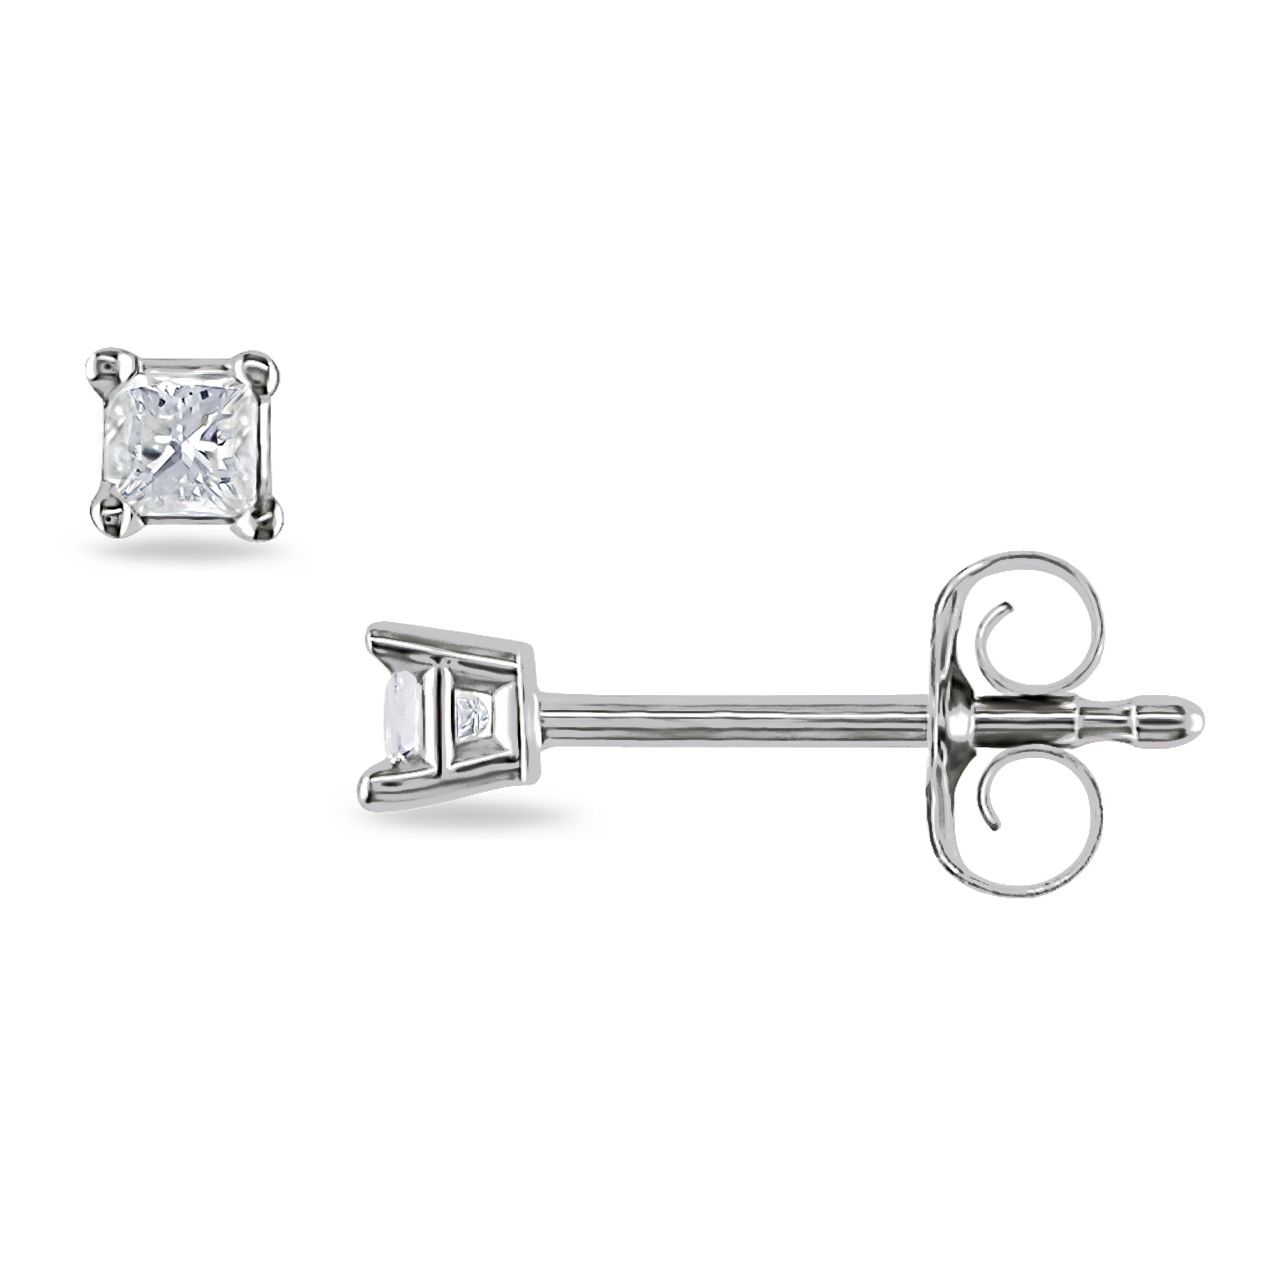 1/10 CT Princess Cut Diamond Solitaire Earrings Set in 10k White Gold (I2-I3)